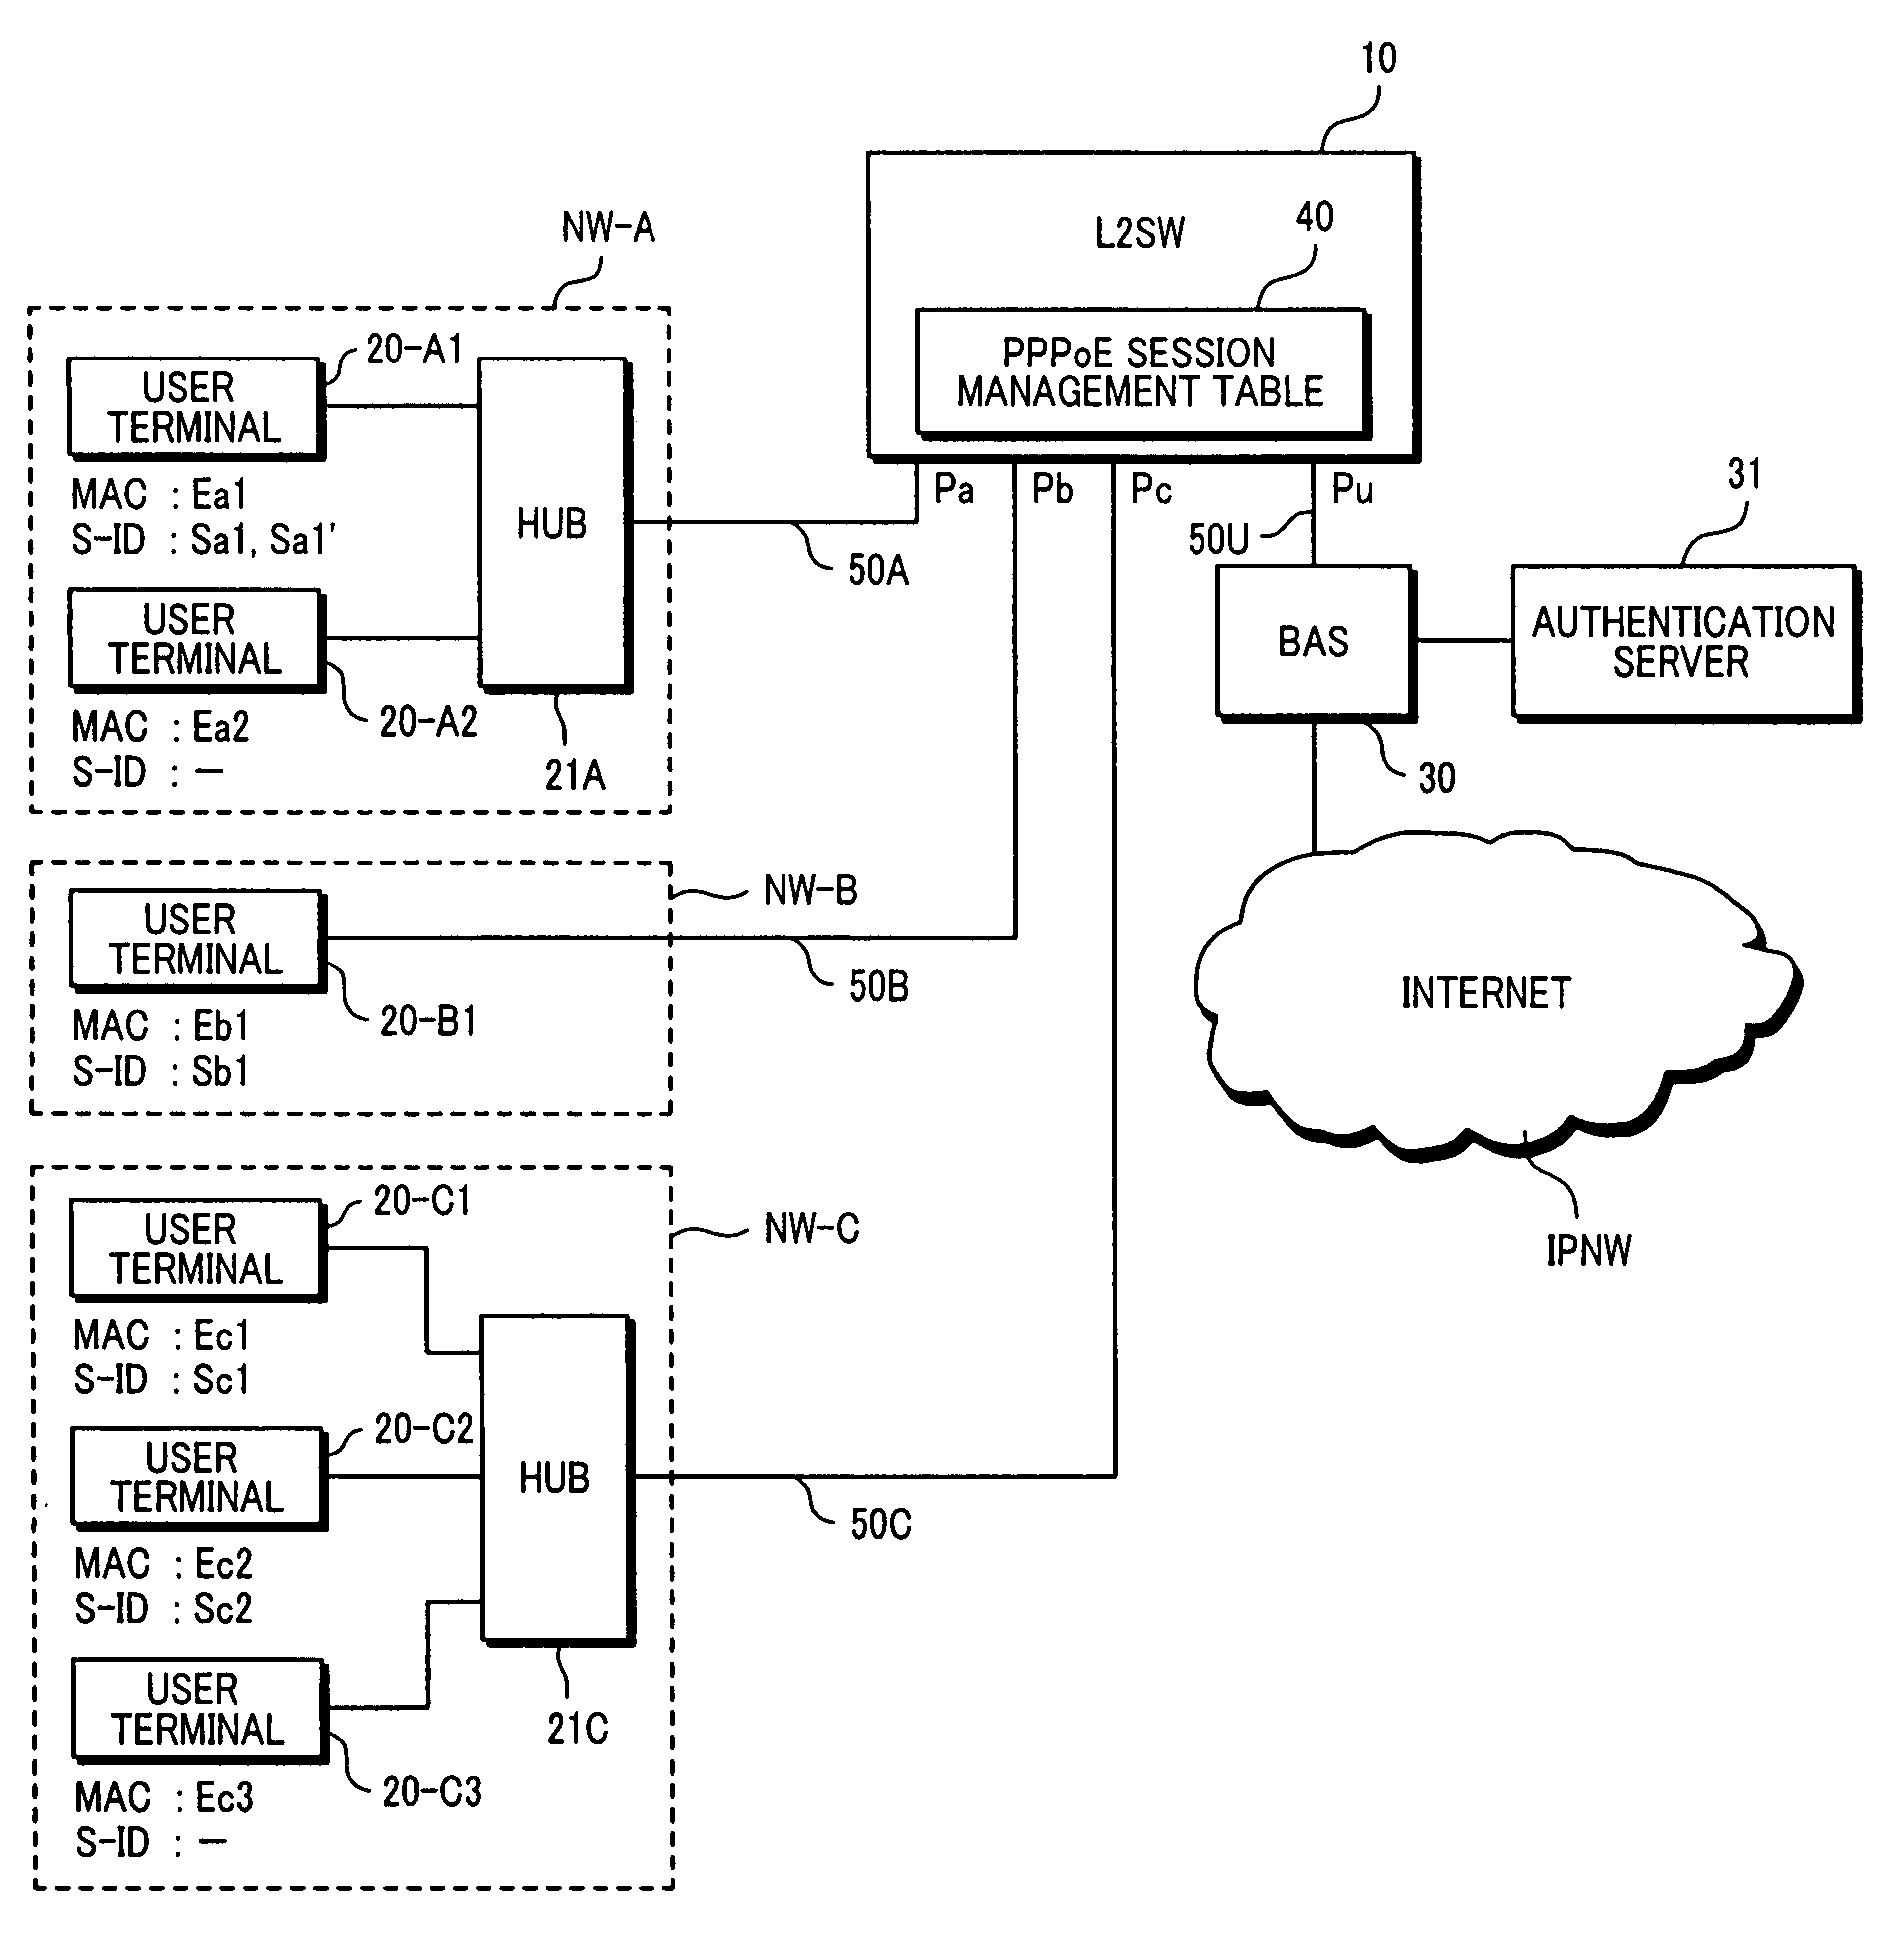 Packet forwarding apparatus with function of limiting the number of user terminals to be connected to ISP